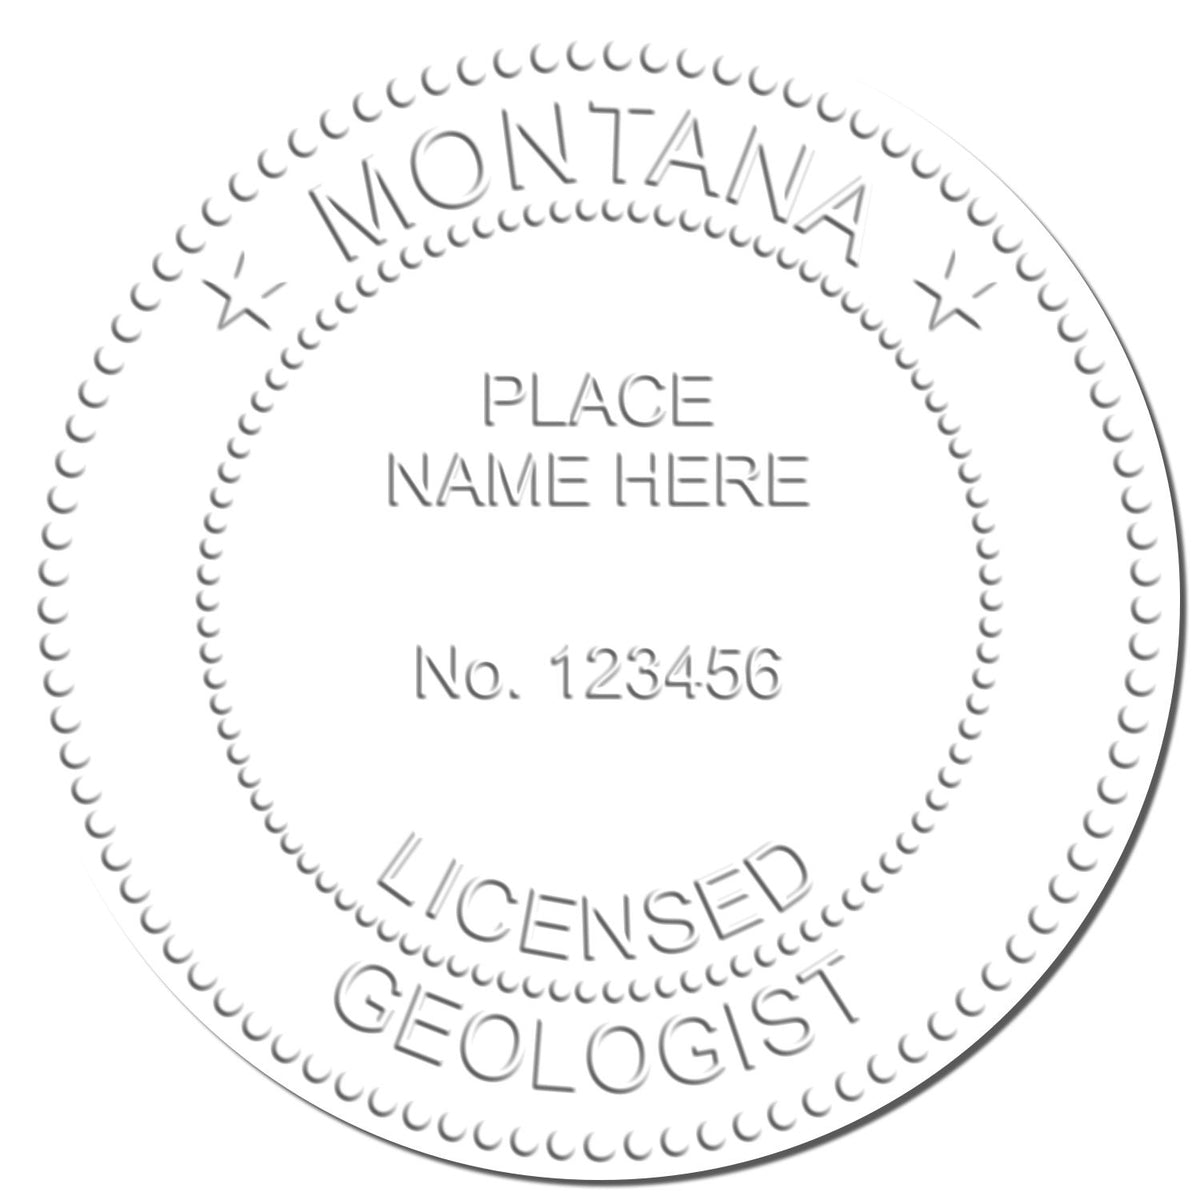 This paper is stamped with a sample imprint of the Handheld Montana Professional Geologist Embosser, signifying its quality and reliability.